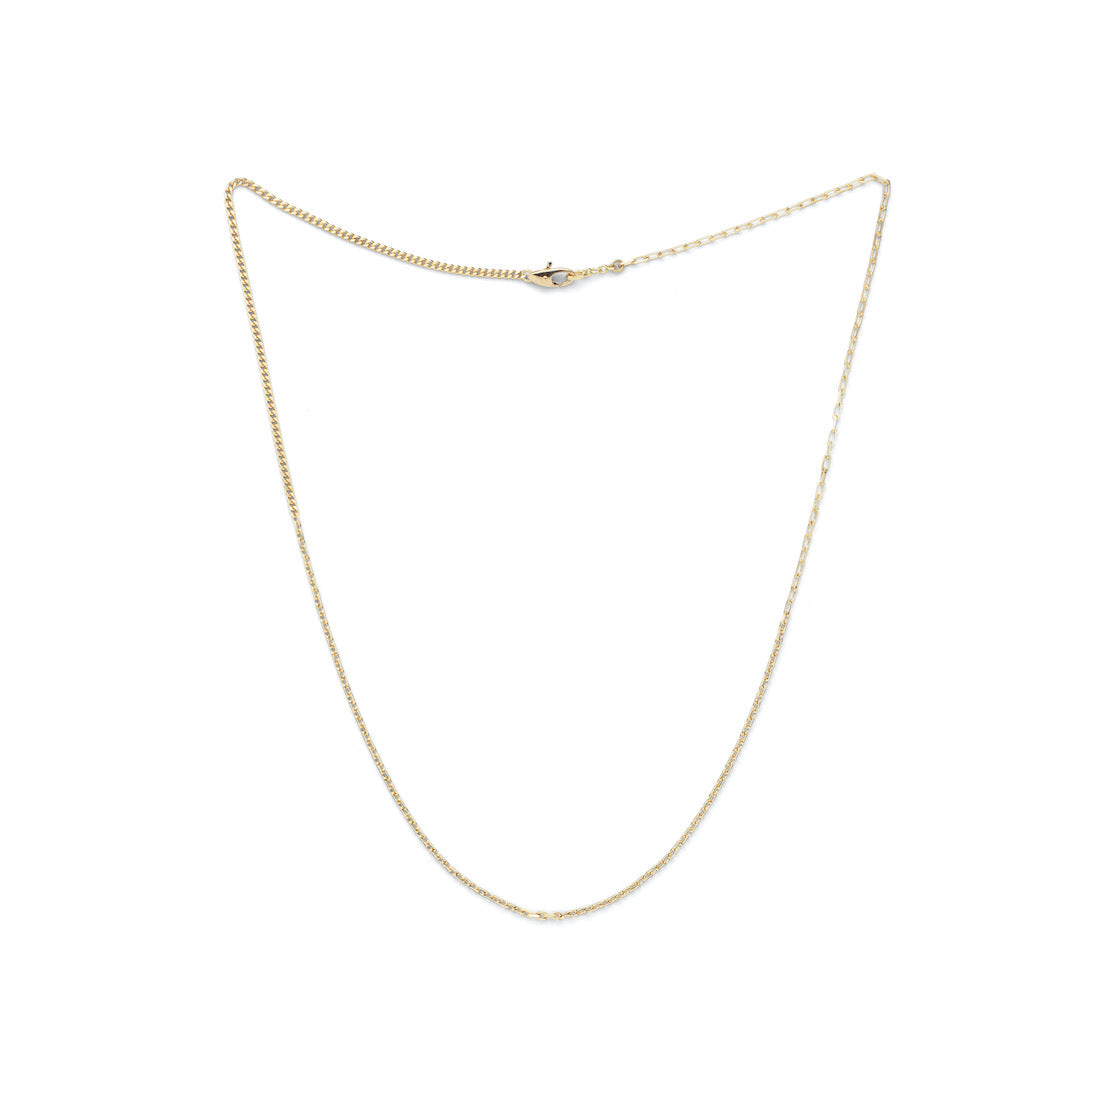 18K　Mixed Chain　ミックスドチェーン　Necklace　ネックレス